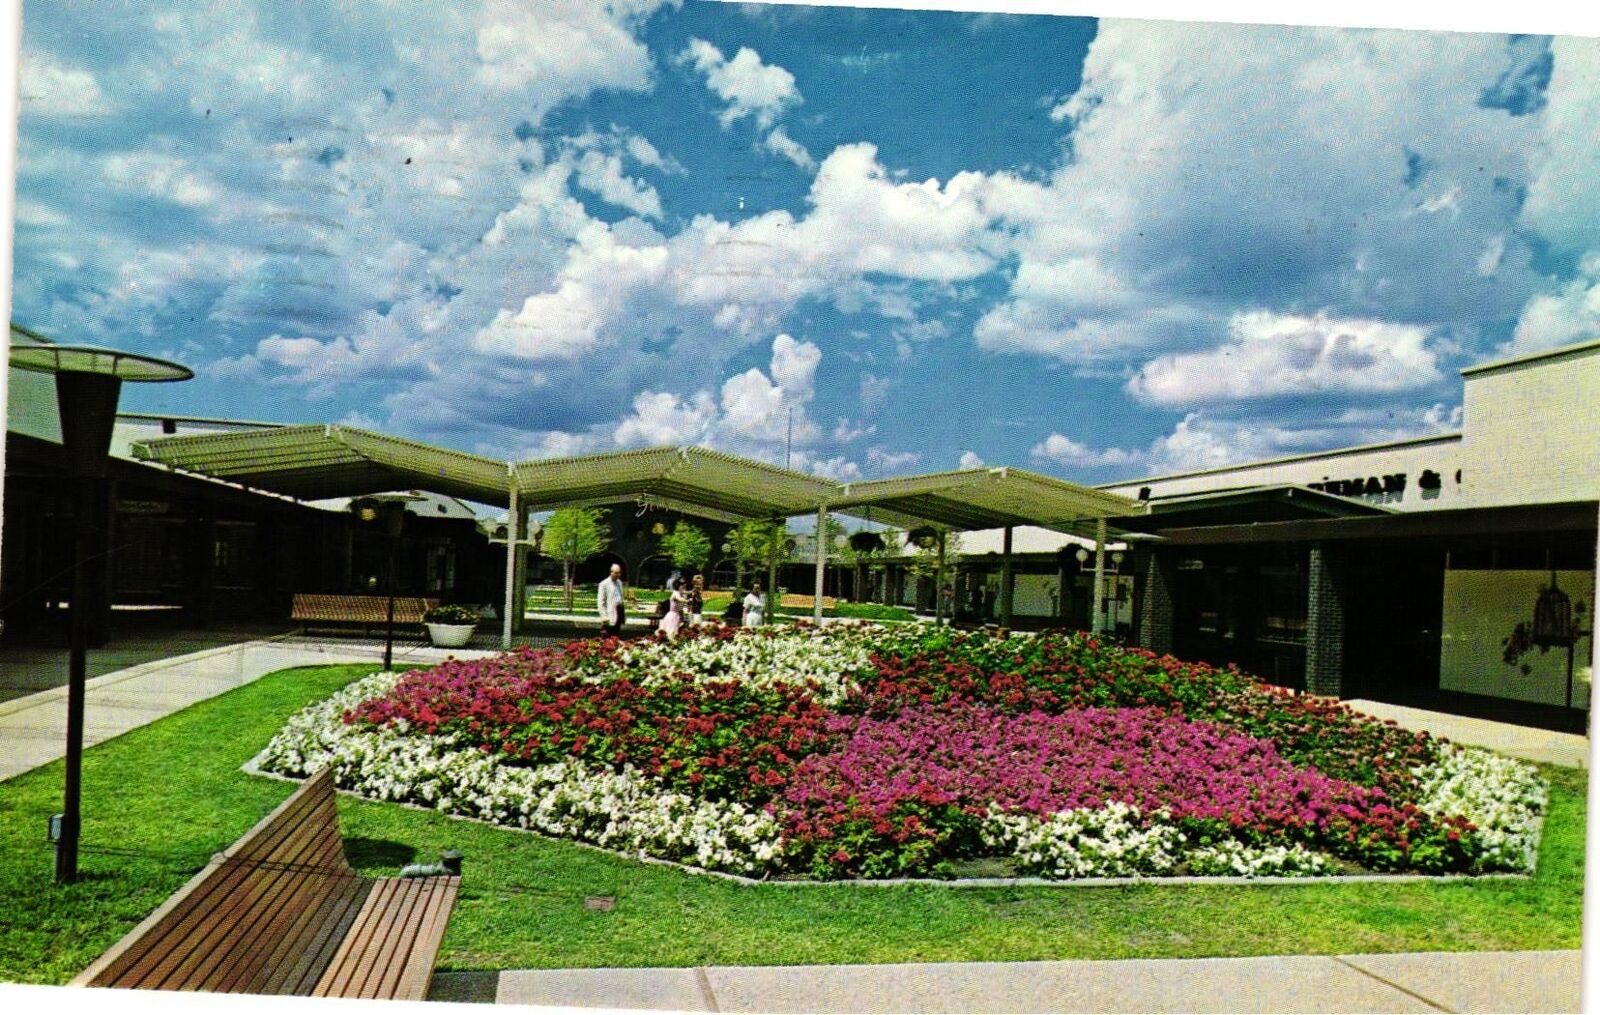 Vintage Postcard- Seminary South Shopping Center, Fort Worth, TX.